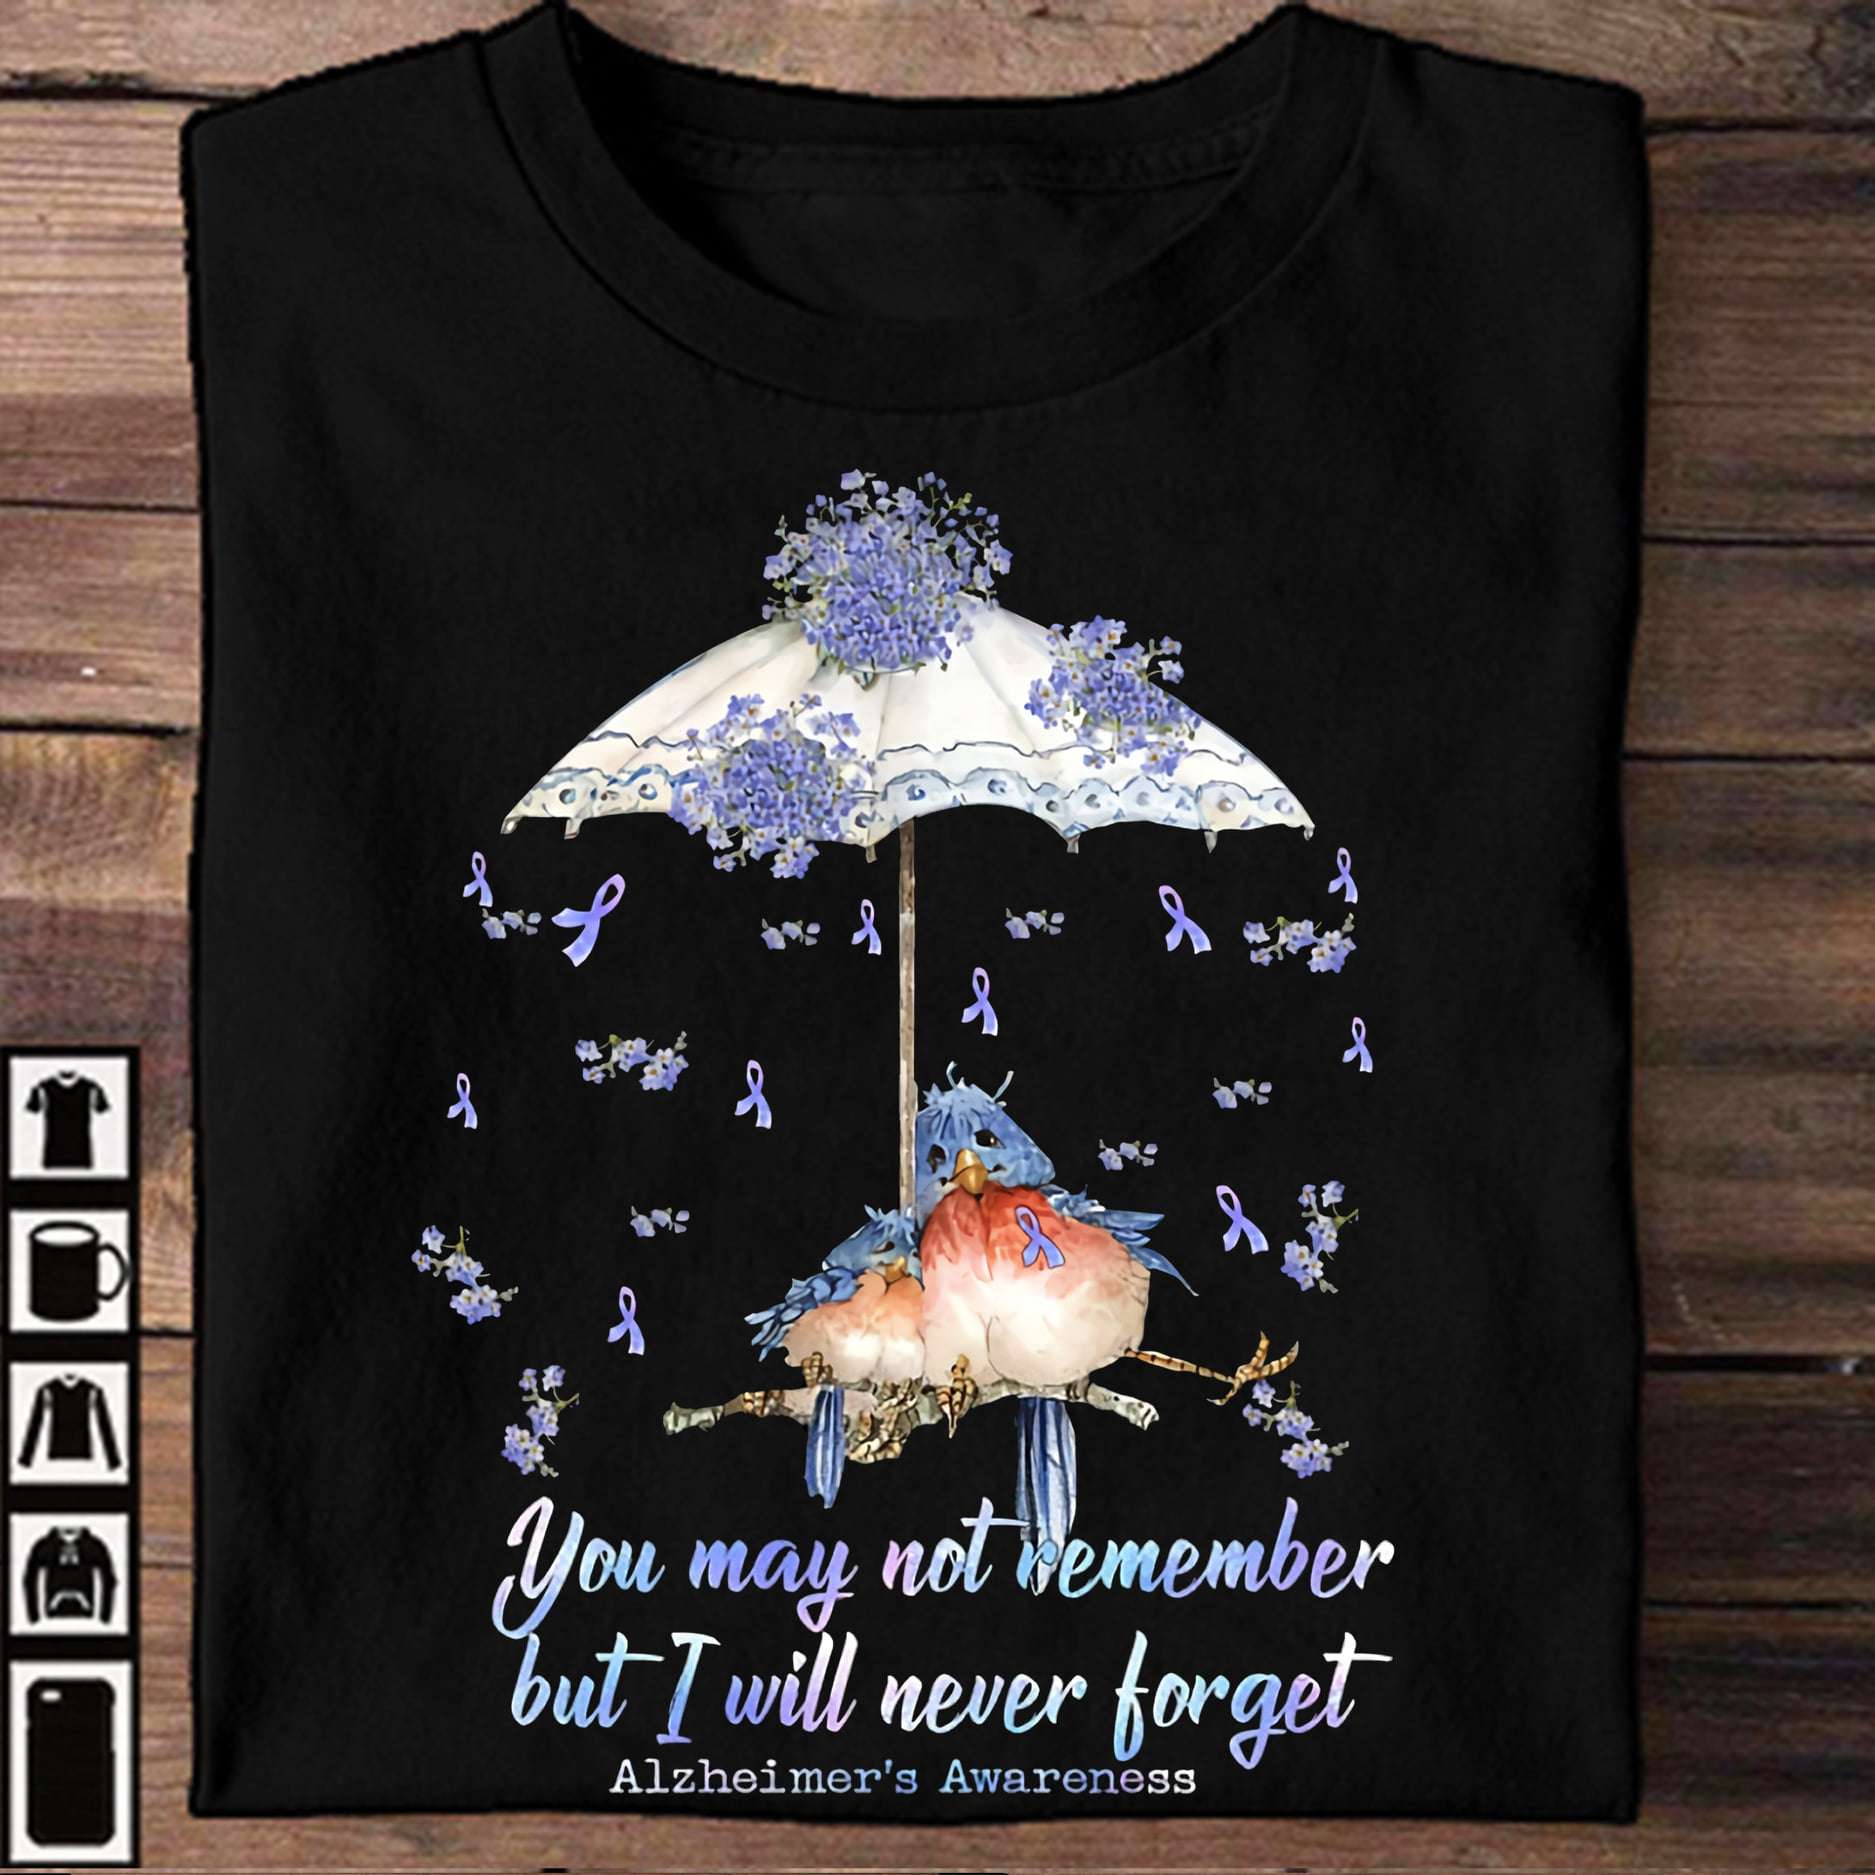 You may not remember but I will never forget - Alzheimer's awareness, bird and umbrella